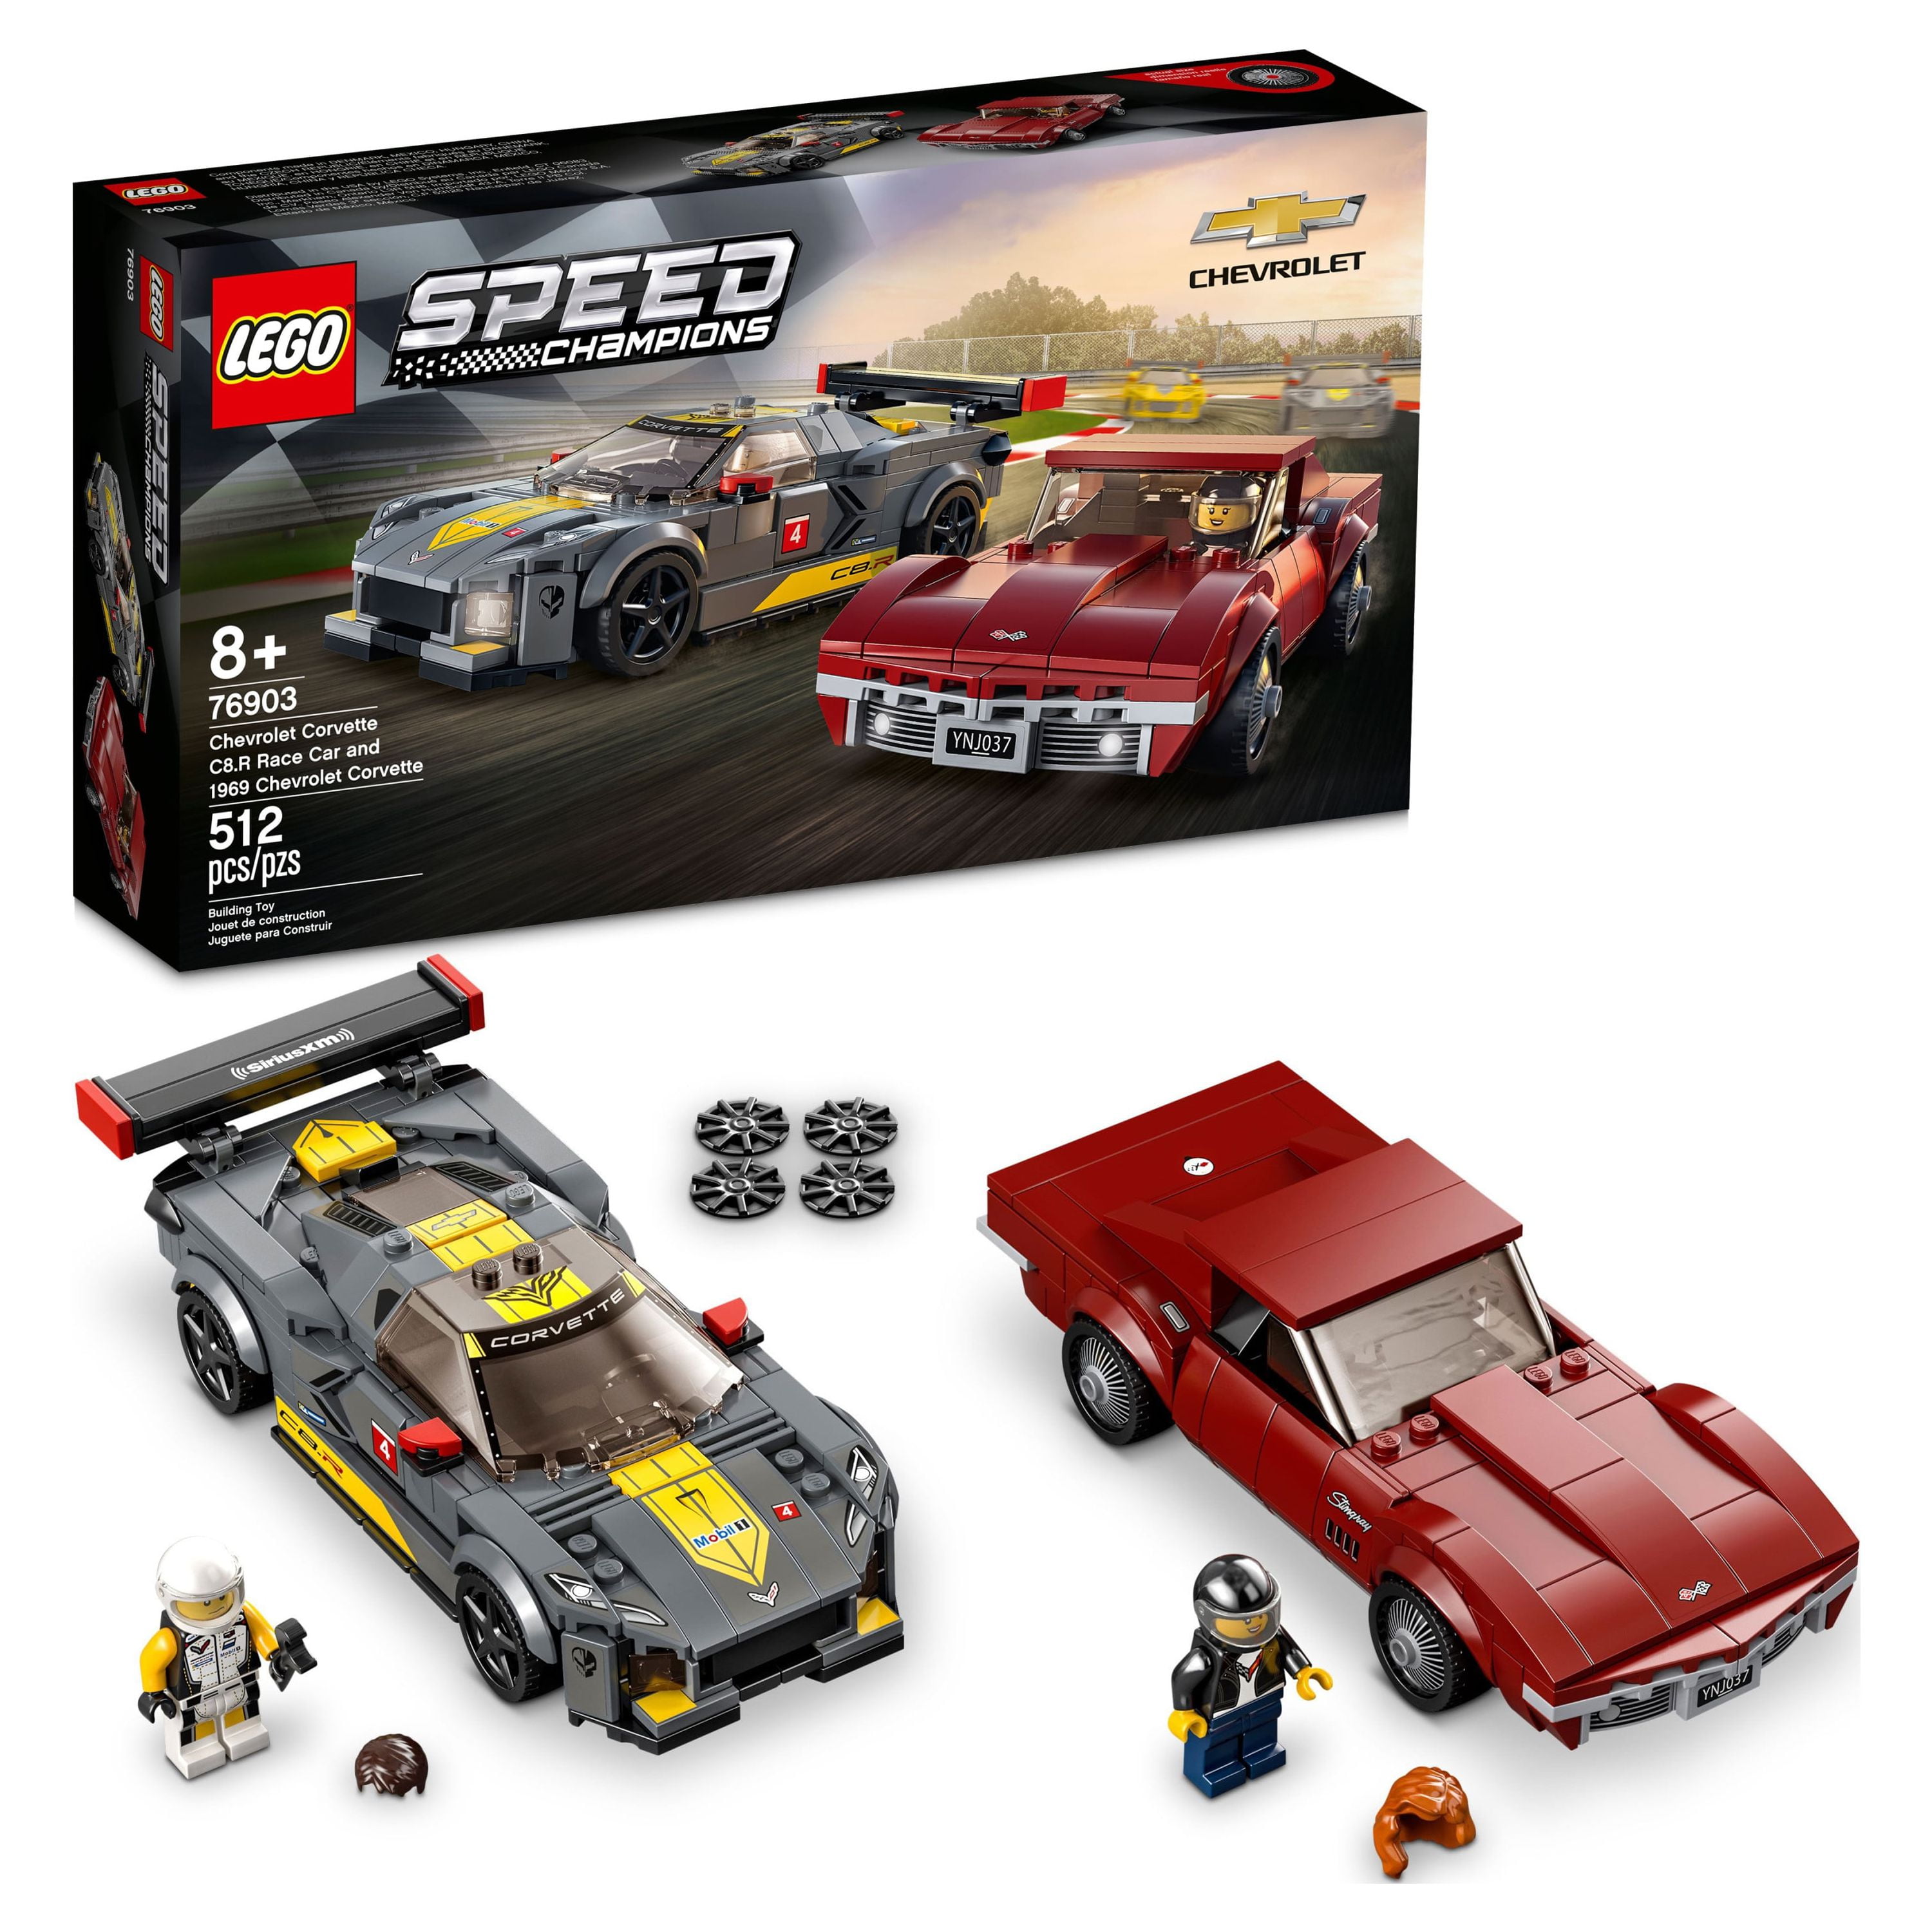 LEGO says Speed Champions' new series will be more diverse